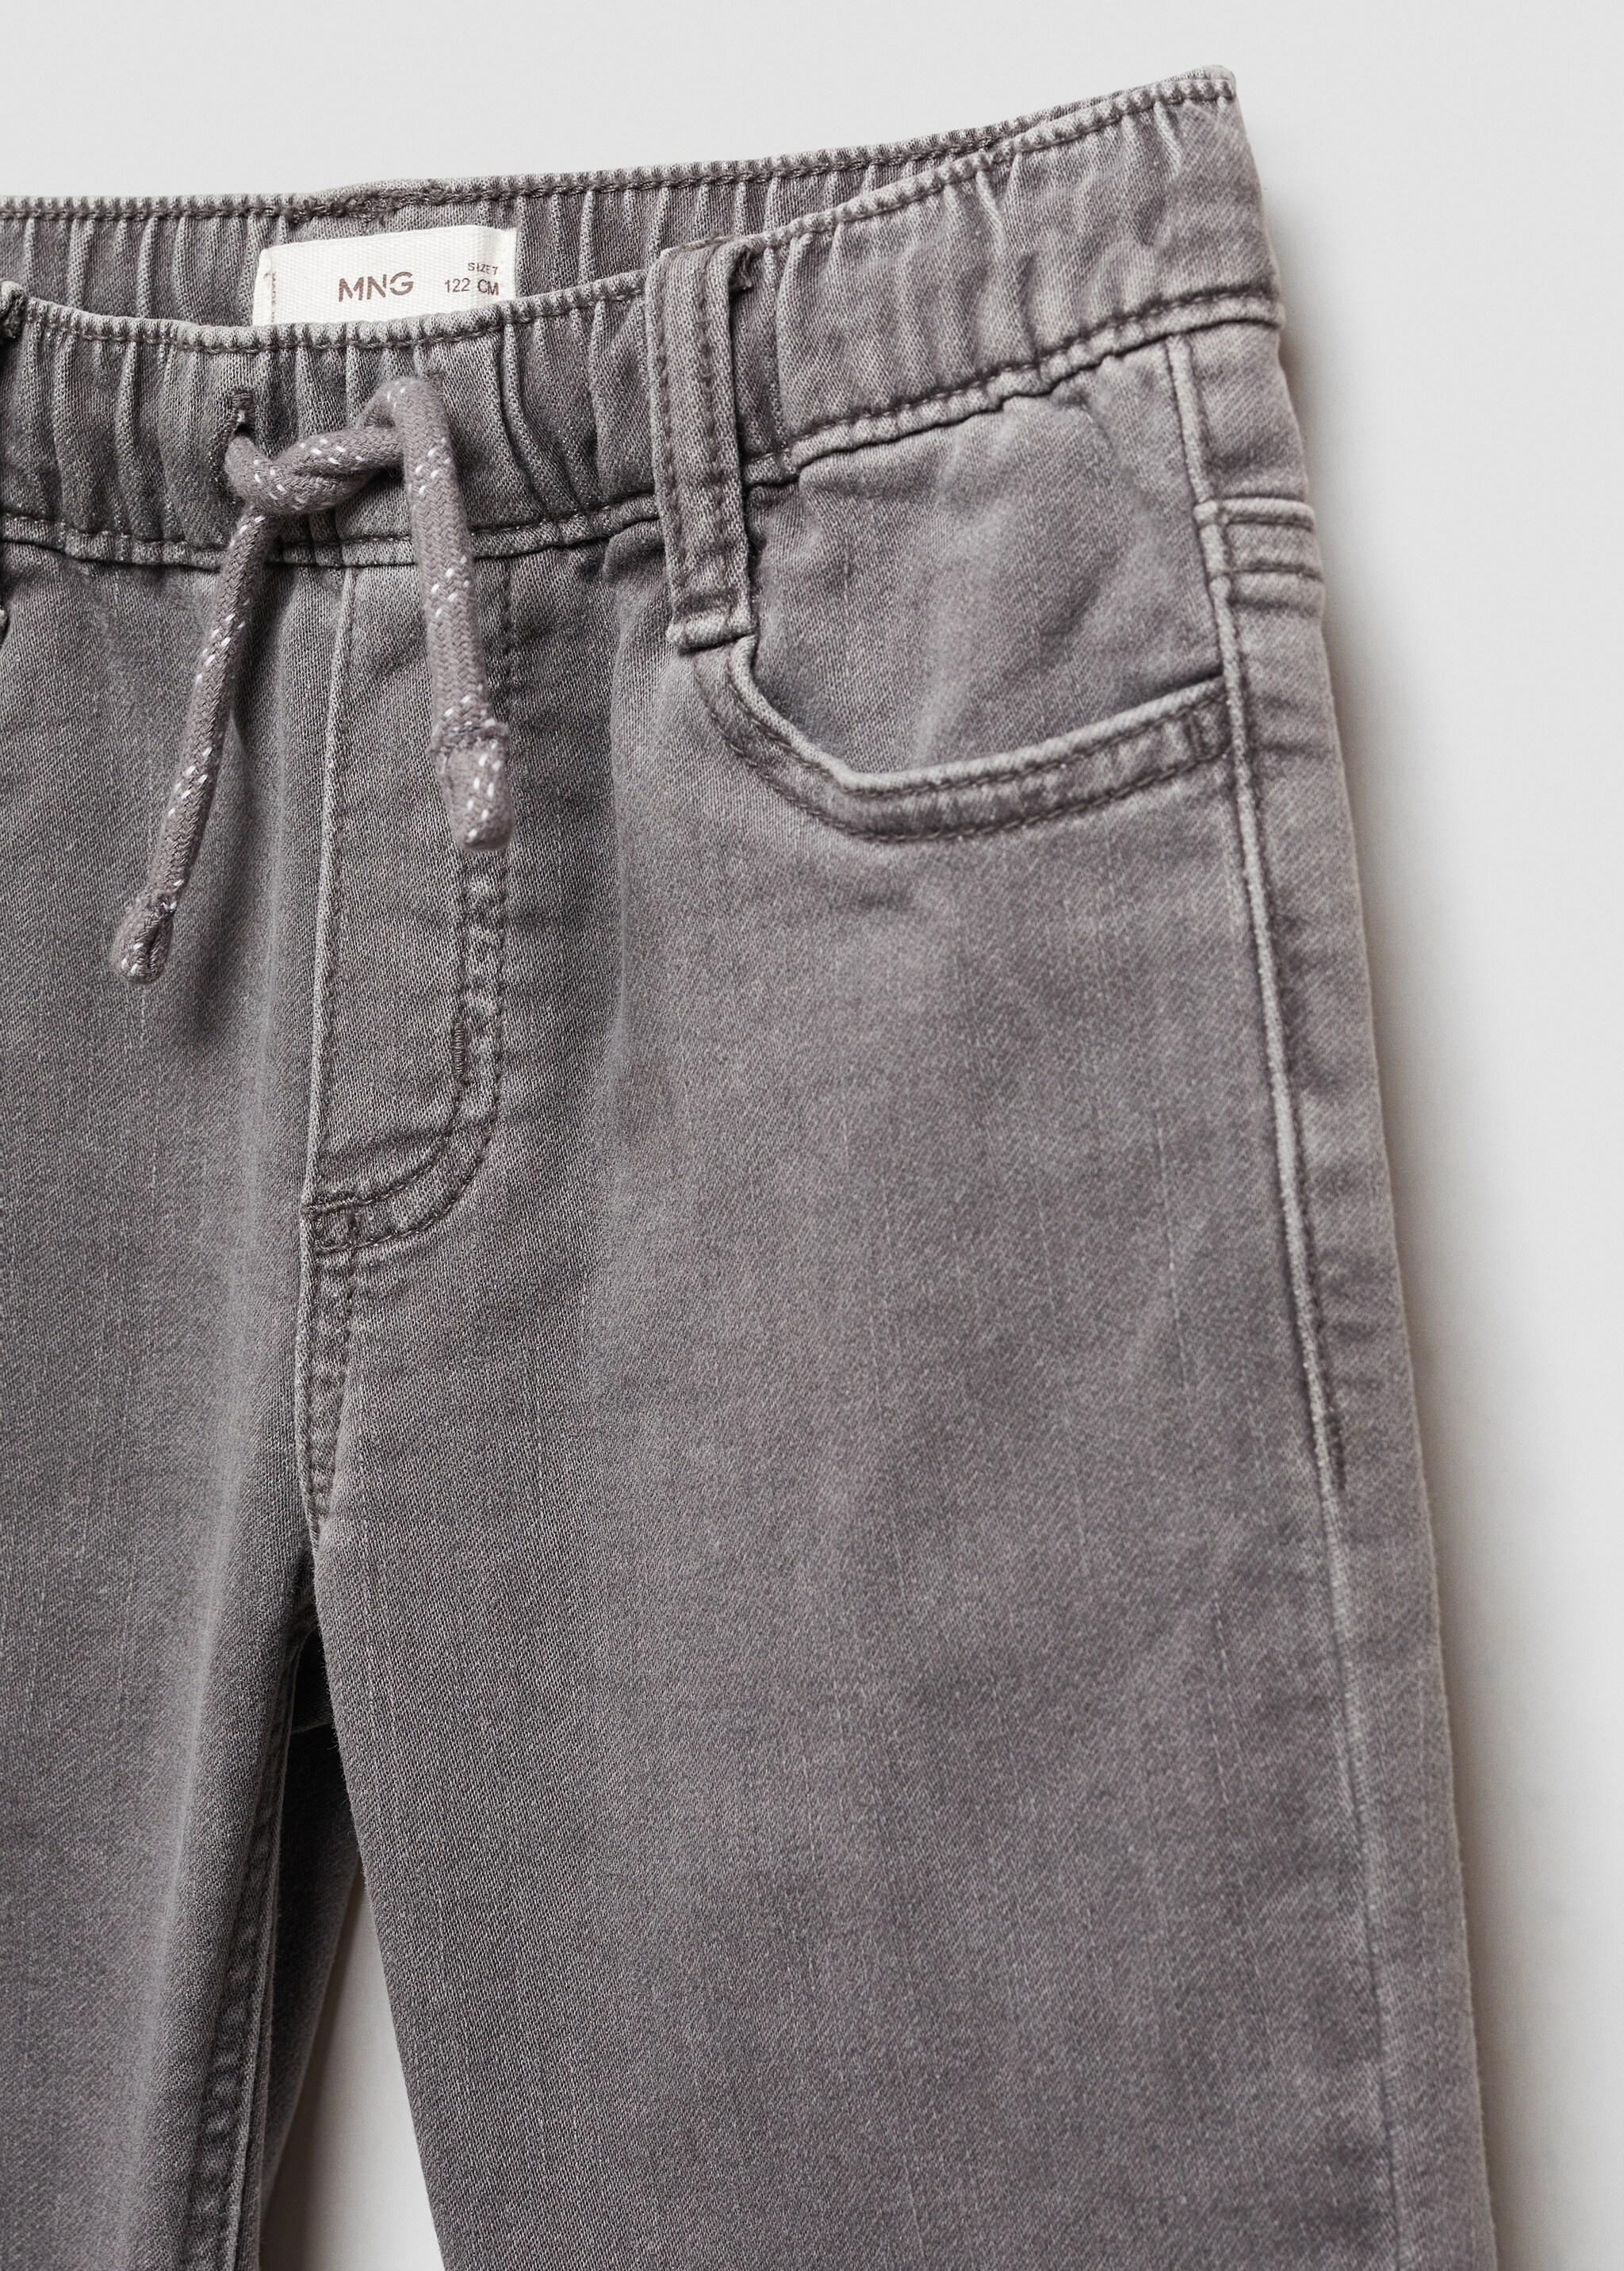 Drawstring waist jeans - Details of the article 8